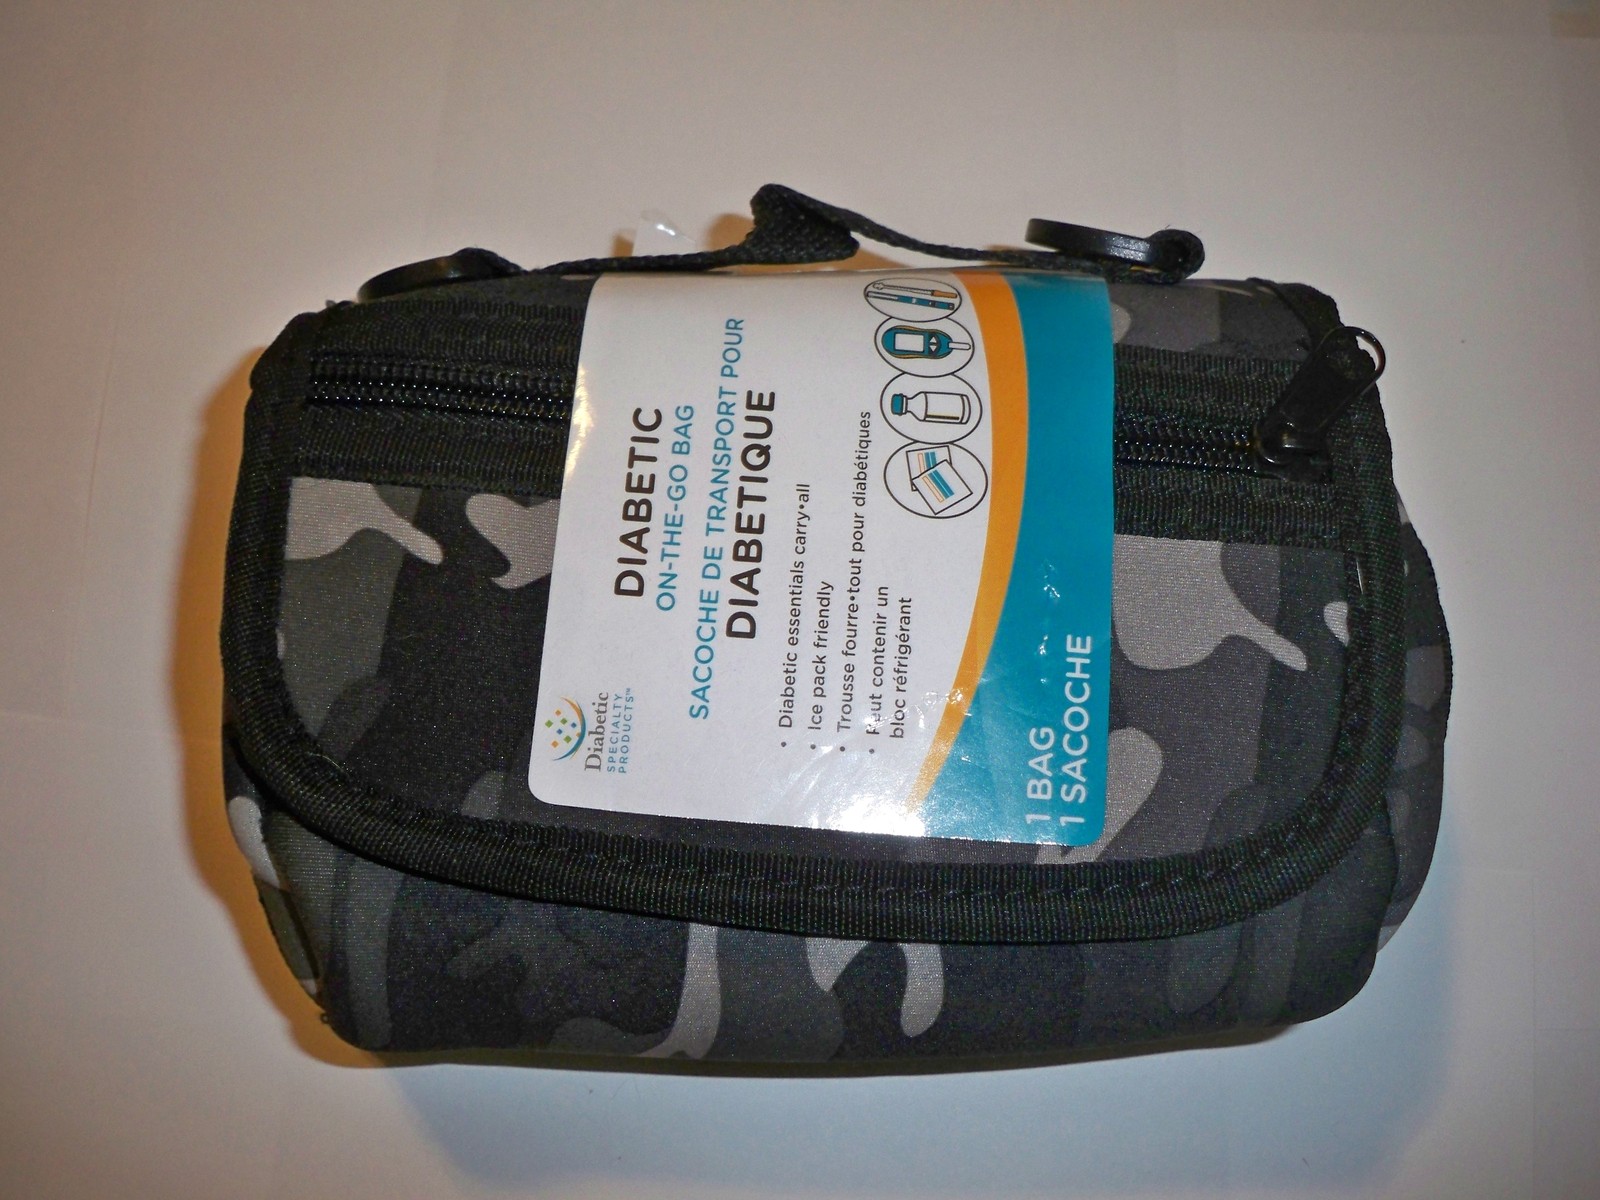 Kids Diabetic on the go bag Insulin Organizer Holder Case Pack CAMO APOTHECARY - $12.99